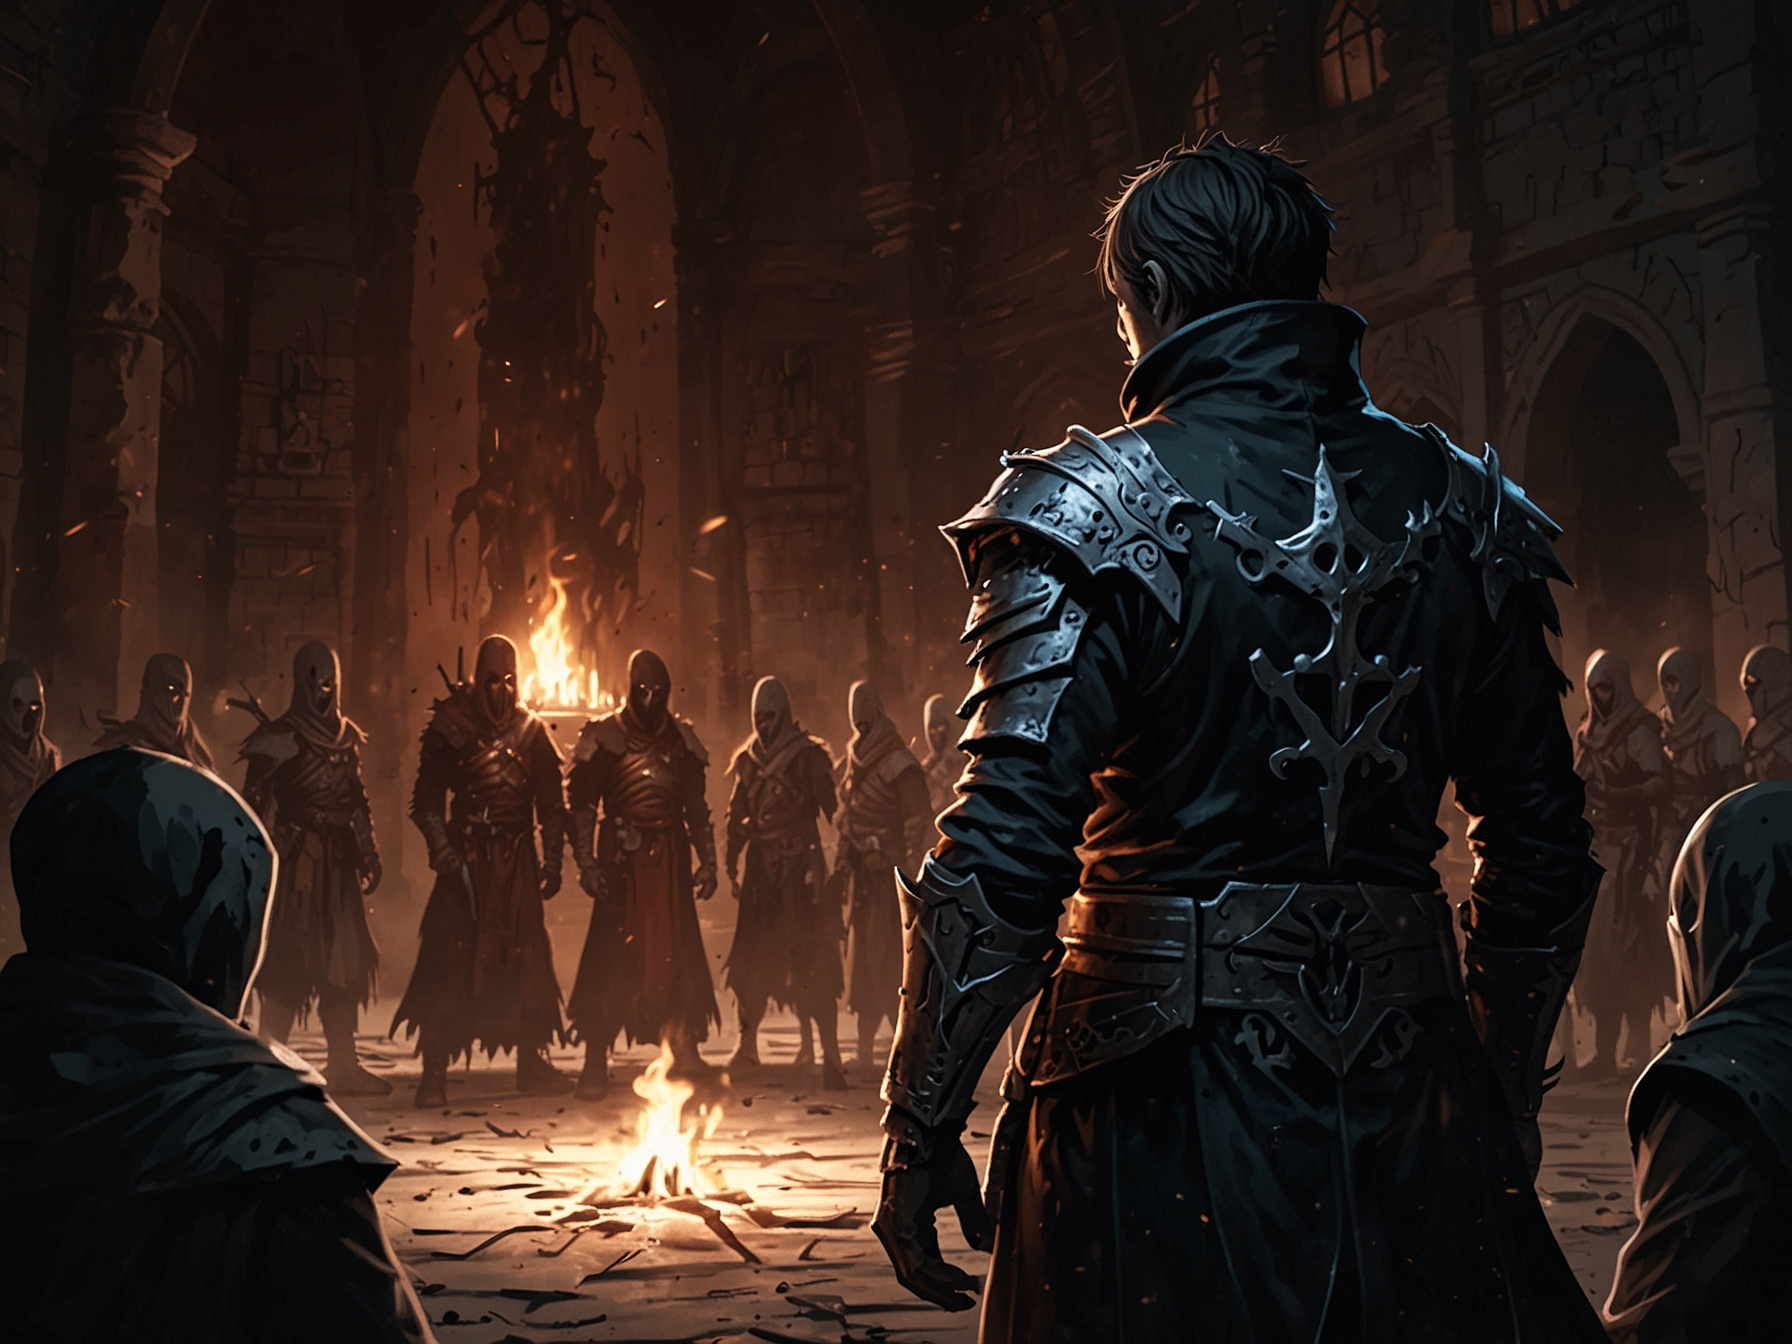 A scene from Reborn Ranker Chronicles depicting the protagonist using dark magic to resurrect an army of the dead as part of his quest for revenge against his former allies.